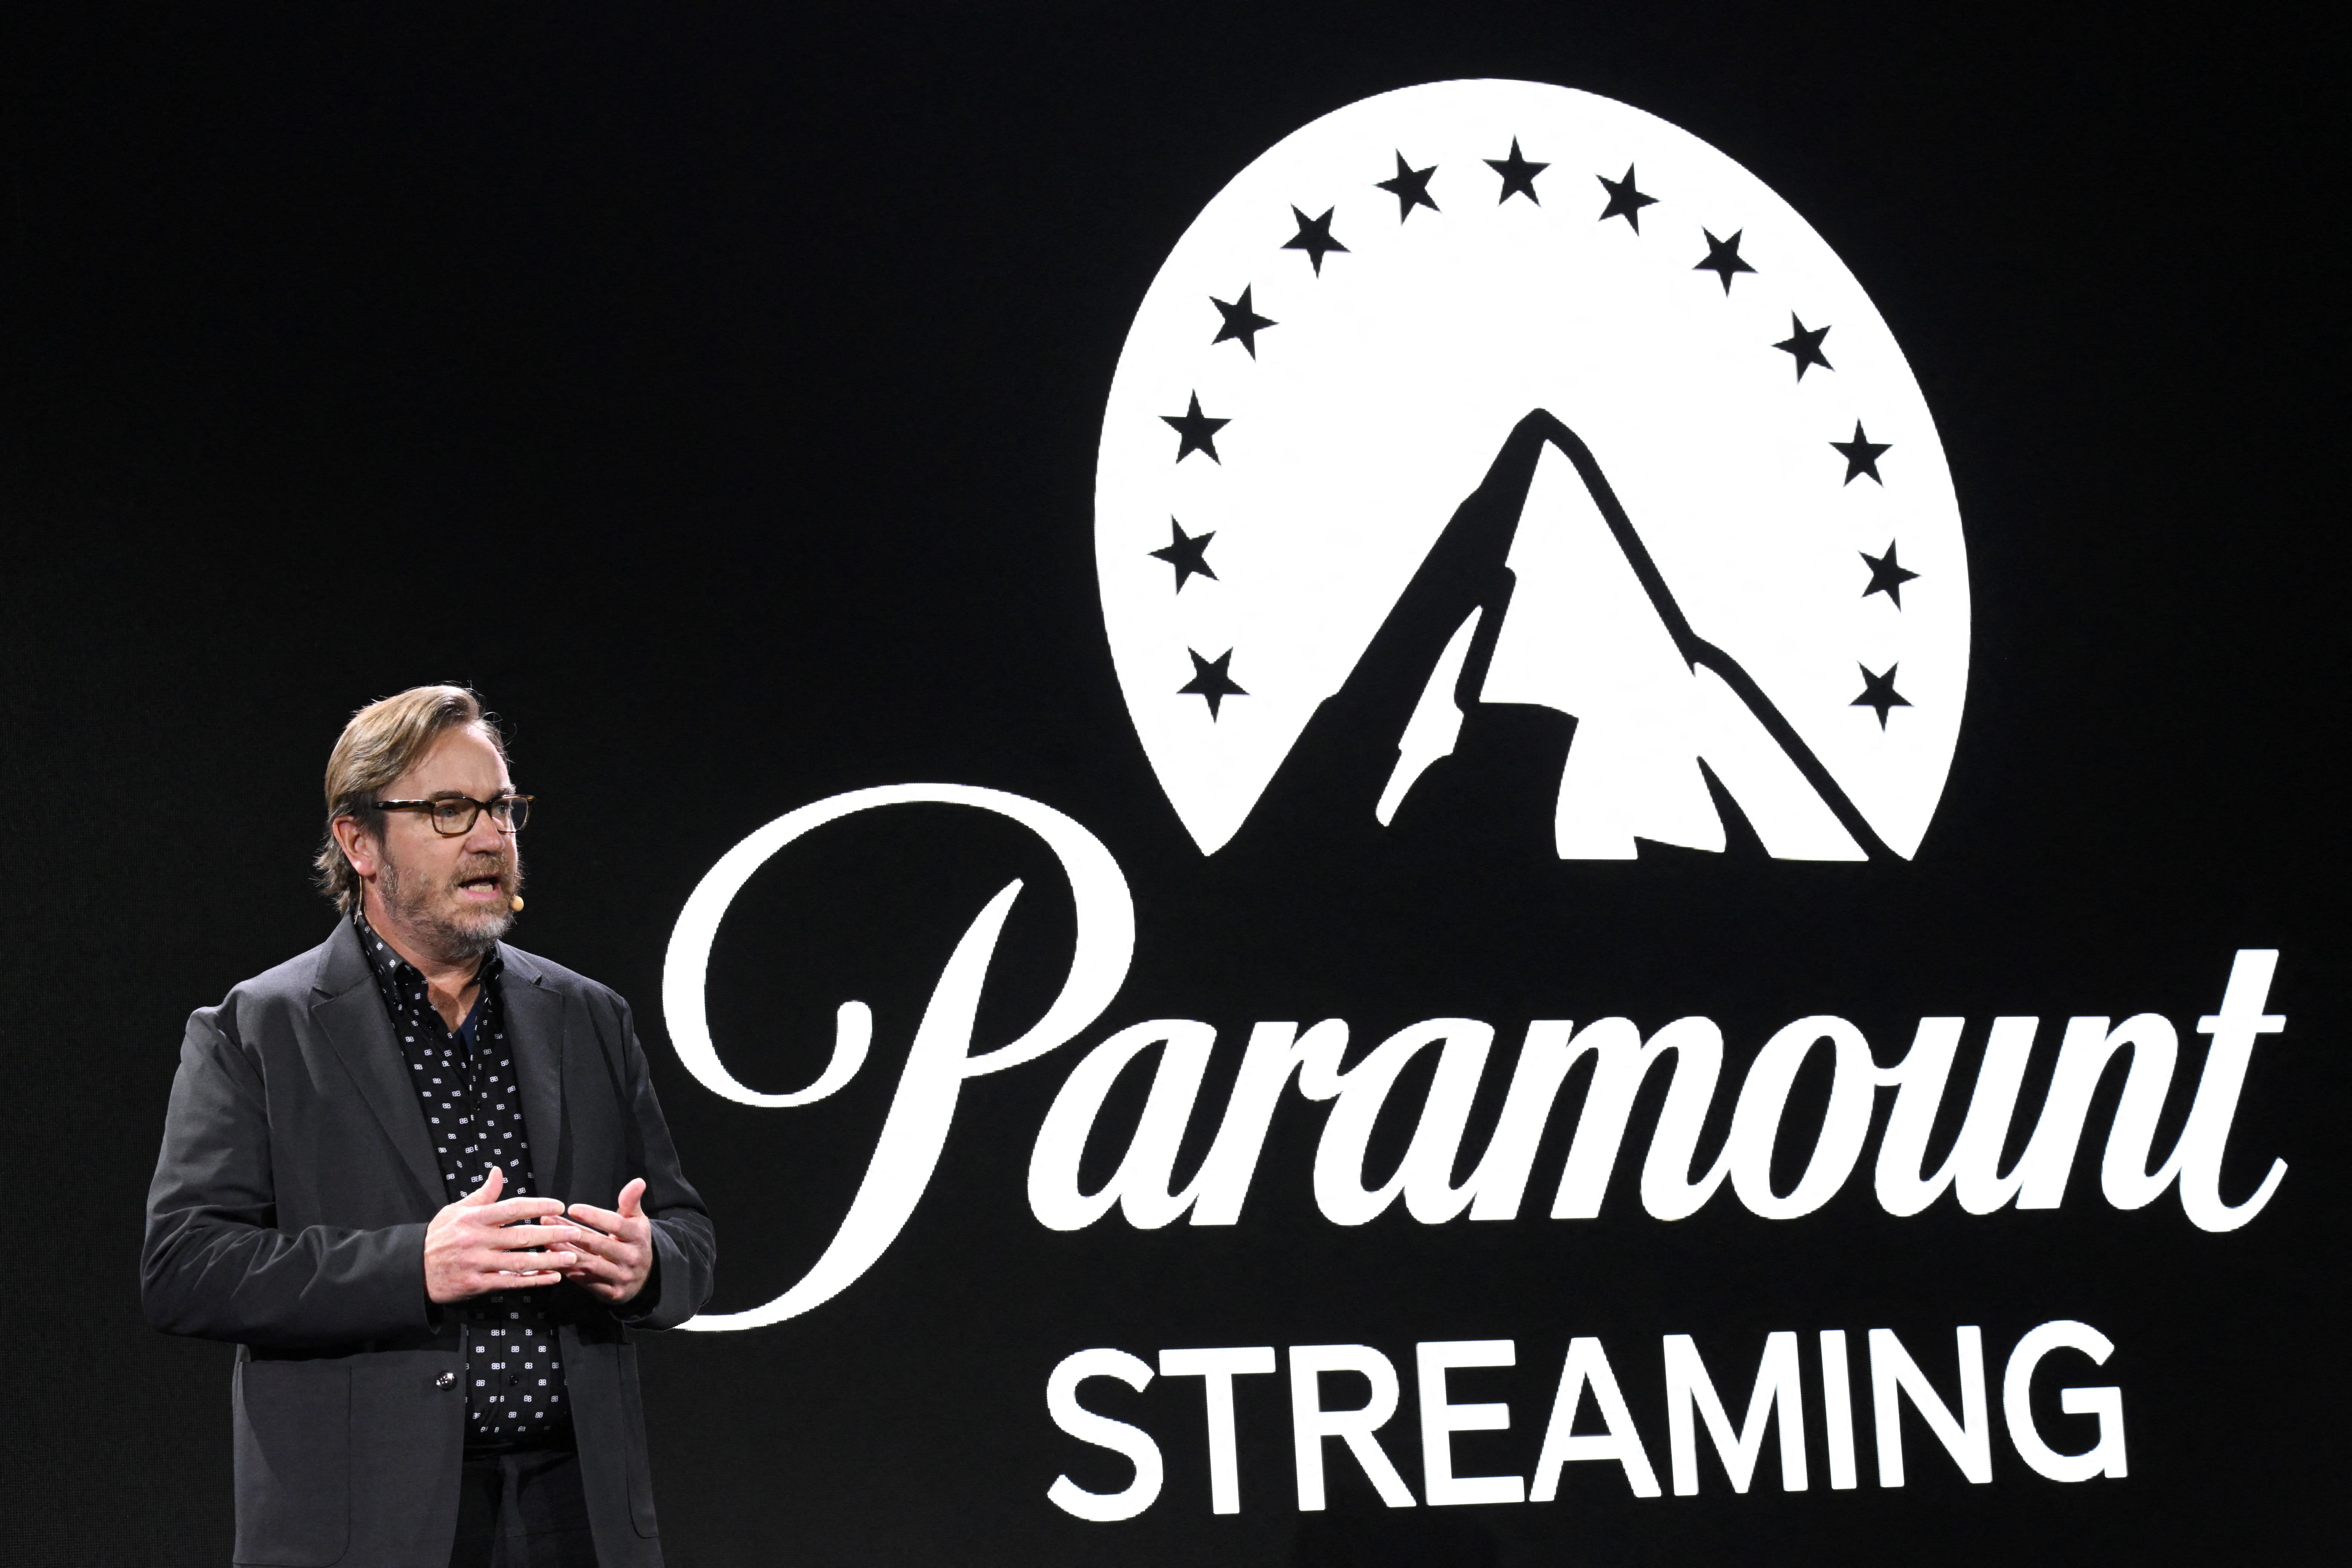 Paramount streaming service to merge with Showtime June 27